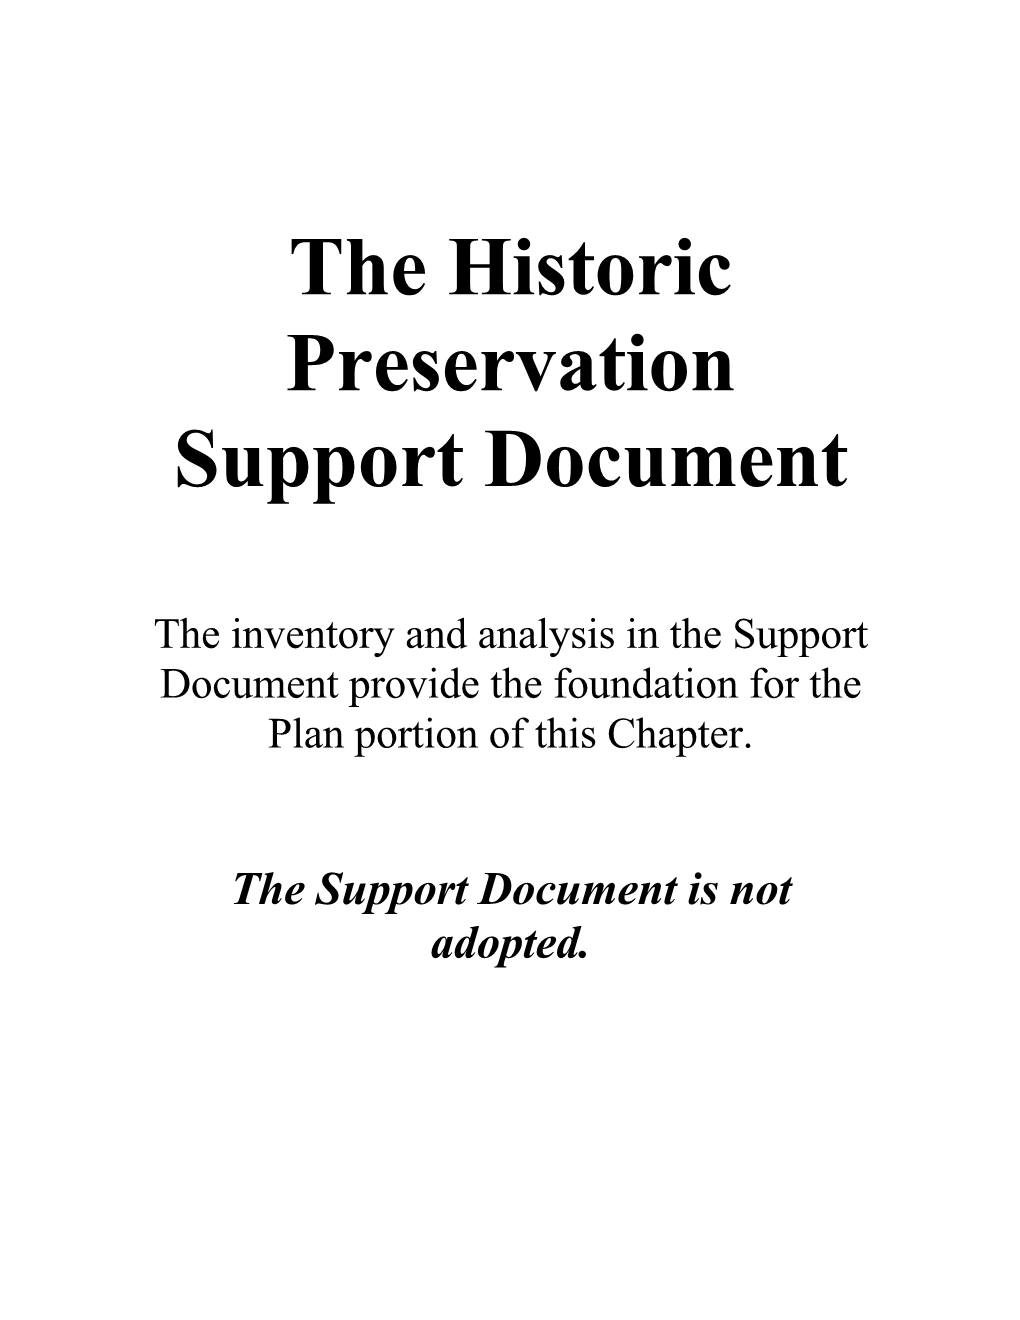 The Historic Preservation Support Document